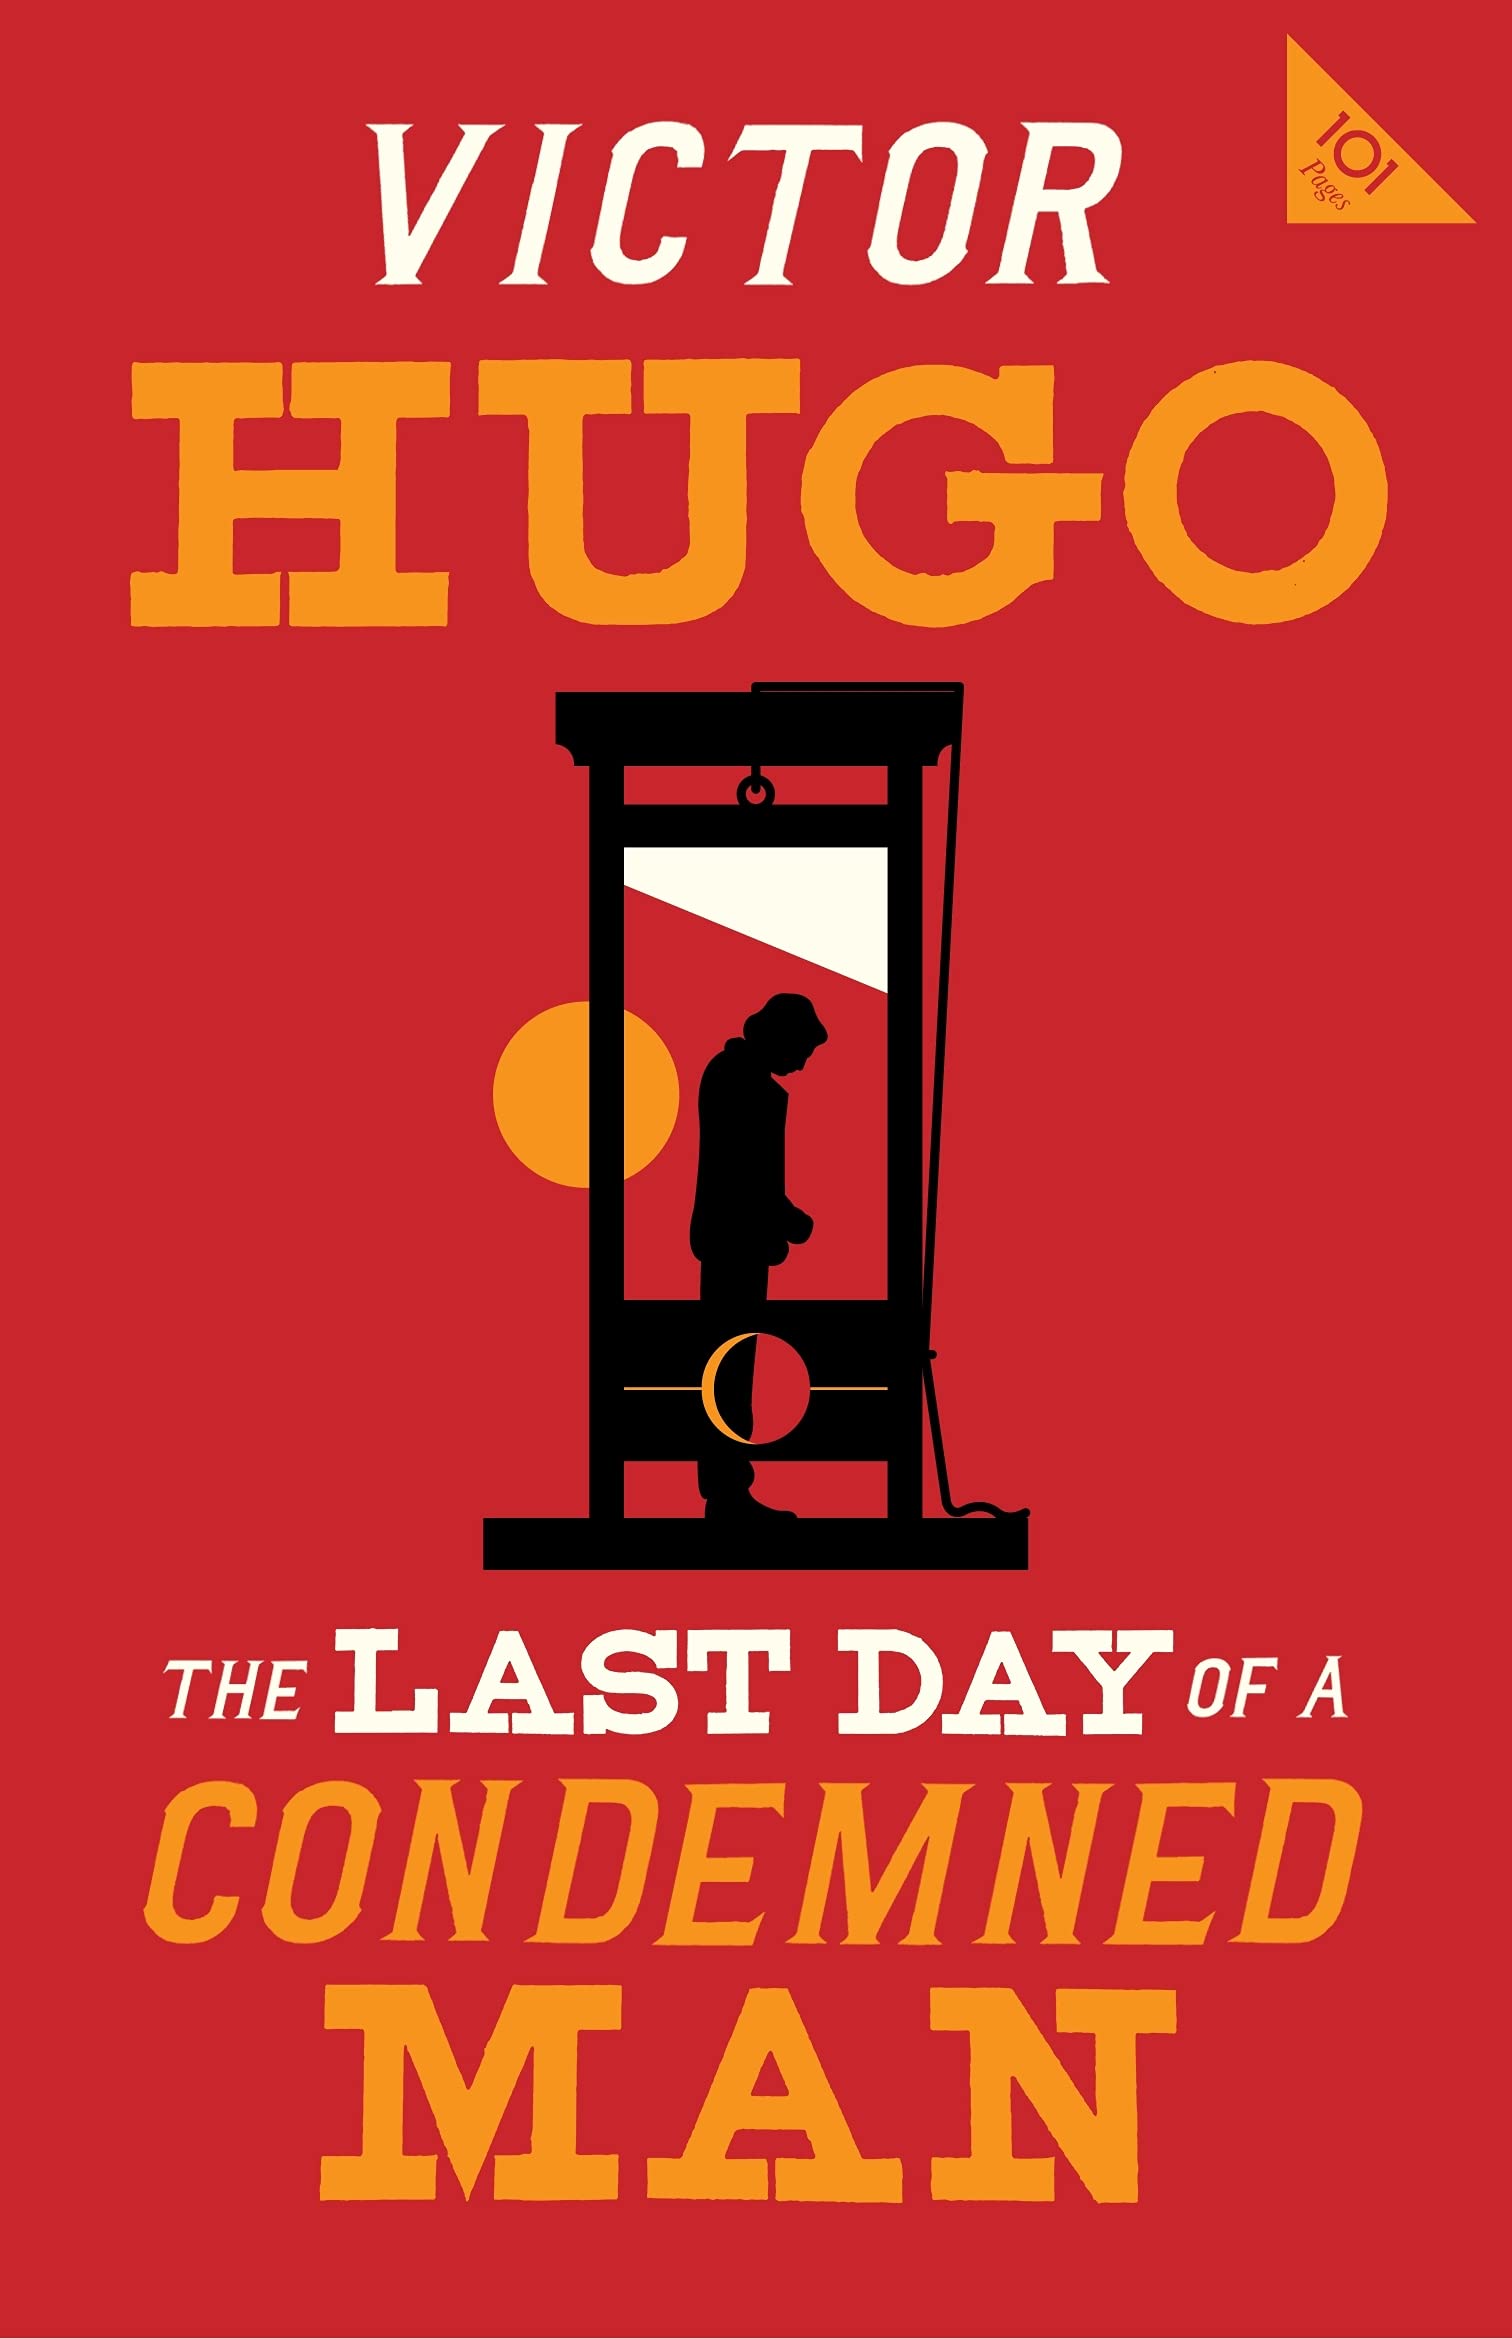 The Last Day of a Condemned Man ( Alma Classics 101 Pages ) - SureShot Books Publishing LLC